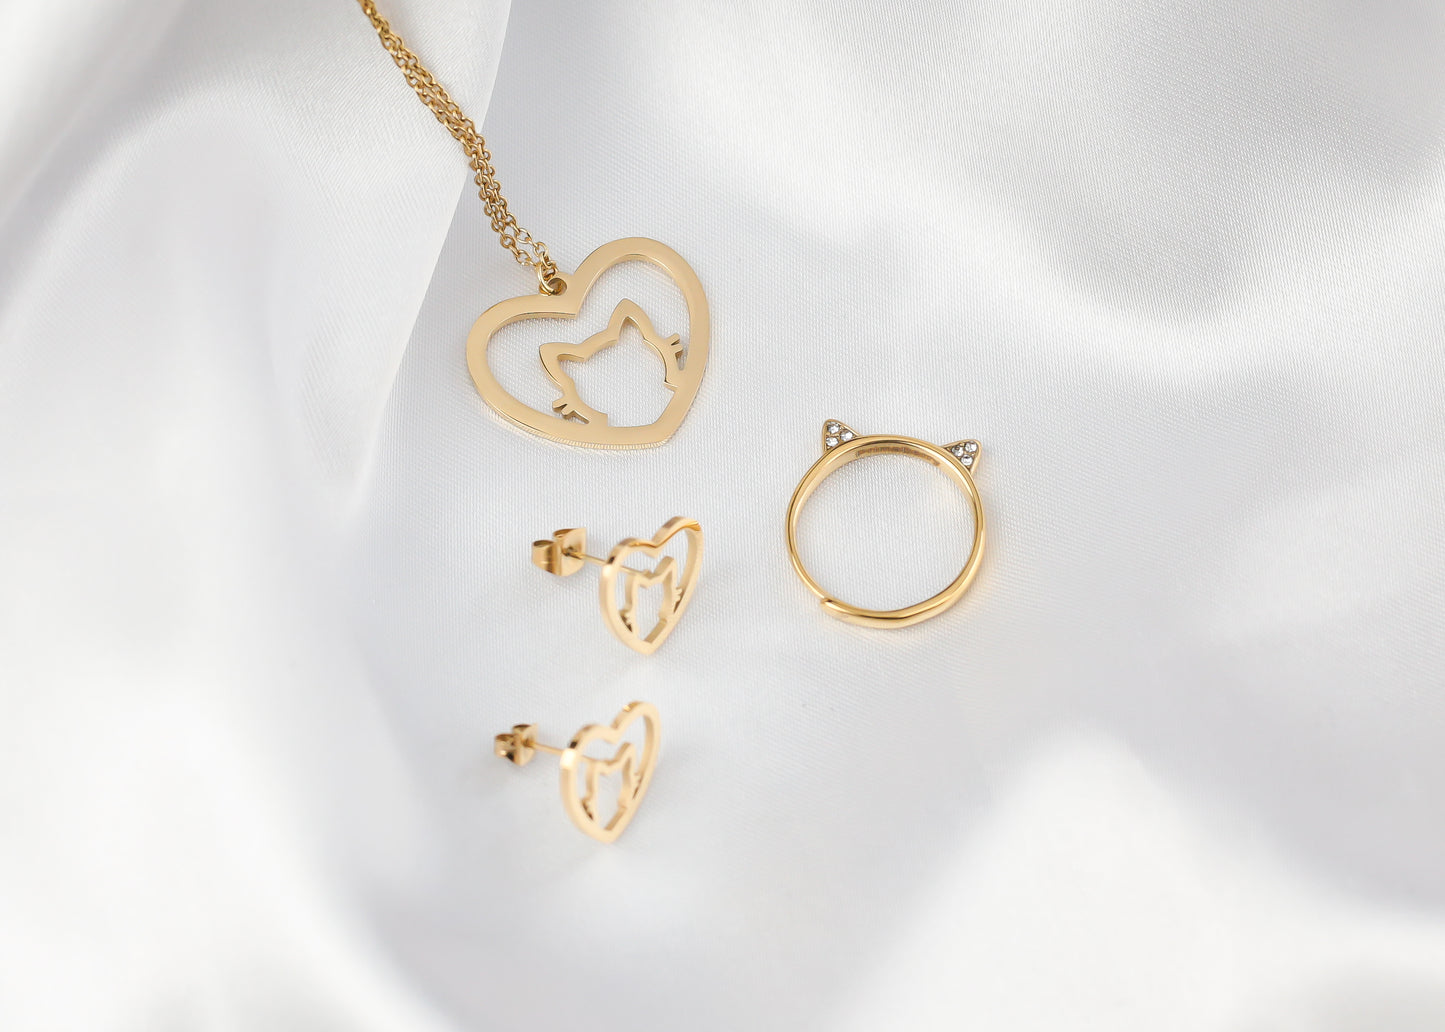 Cat Jewellery Set: A Cute and Unique Gift for Cat Lovers